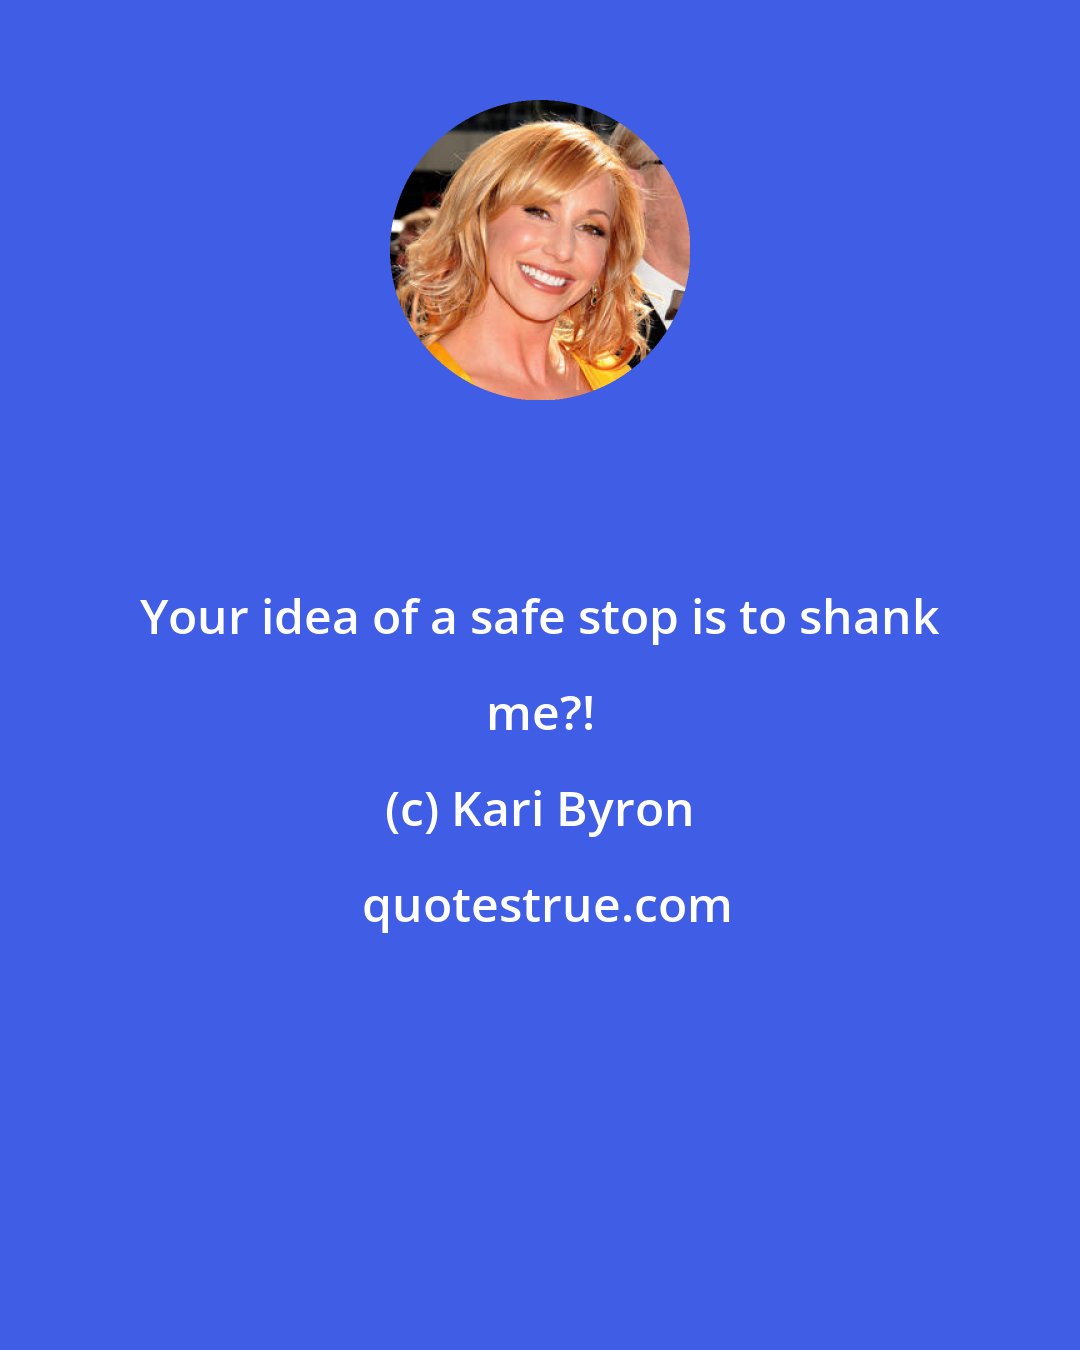 Kari Byron: Your idea of a safe stop is to shank me?!